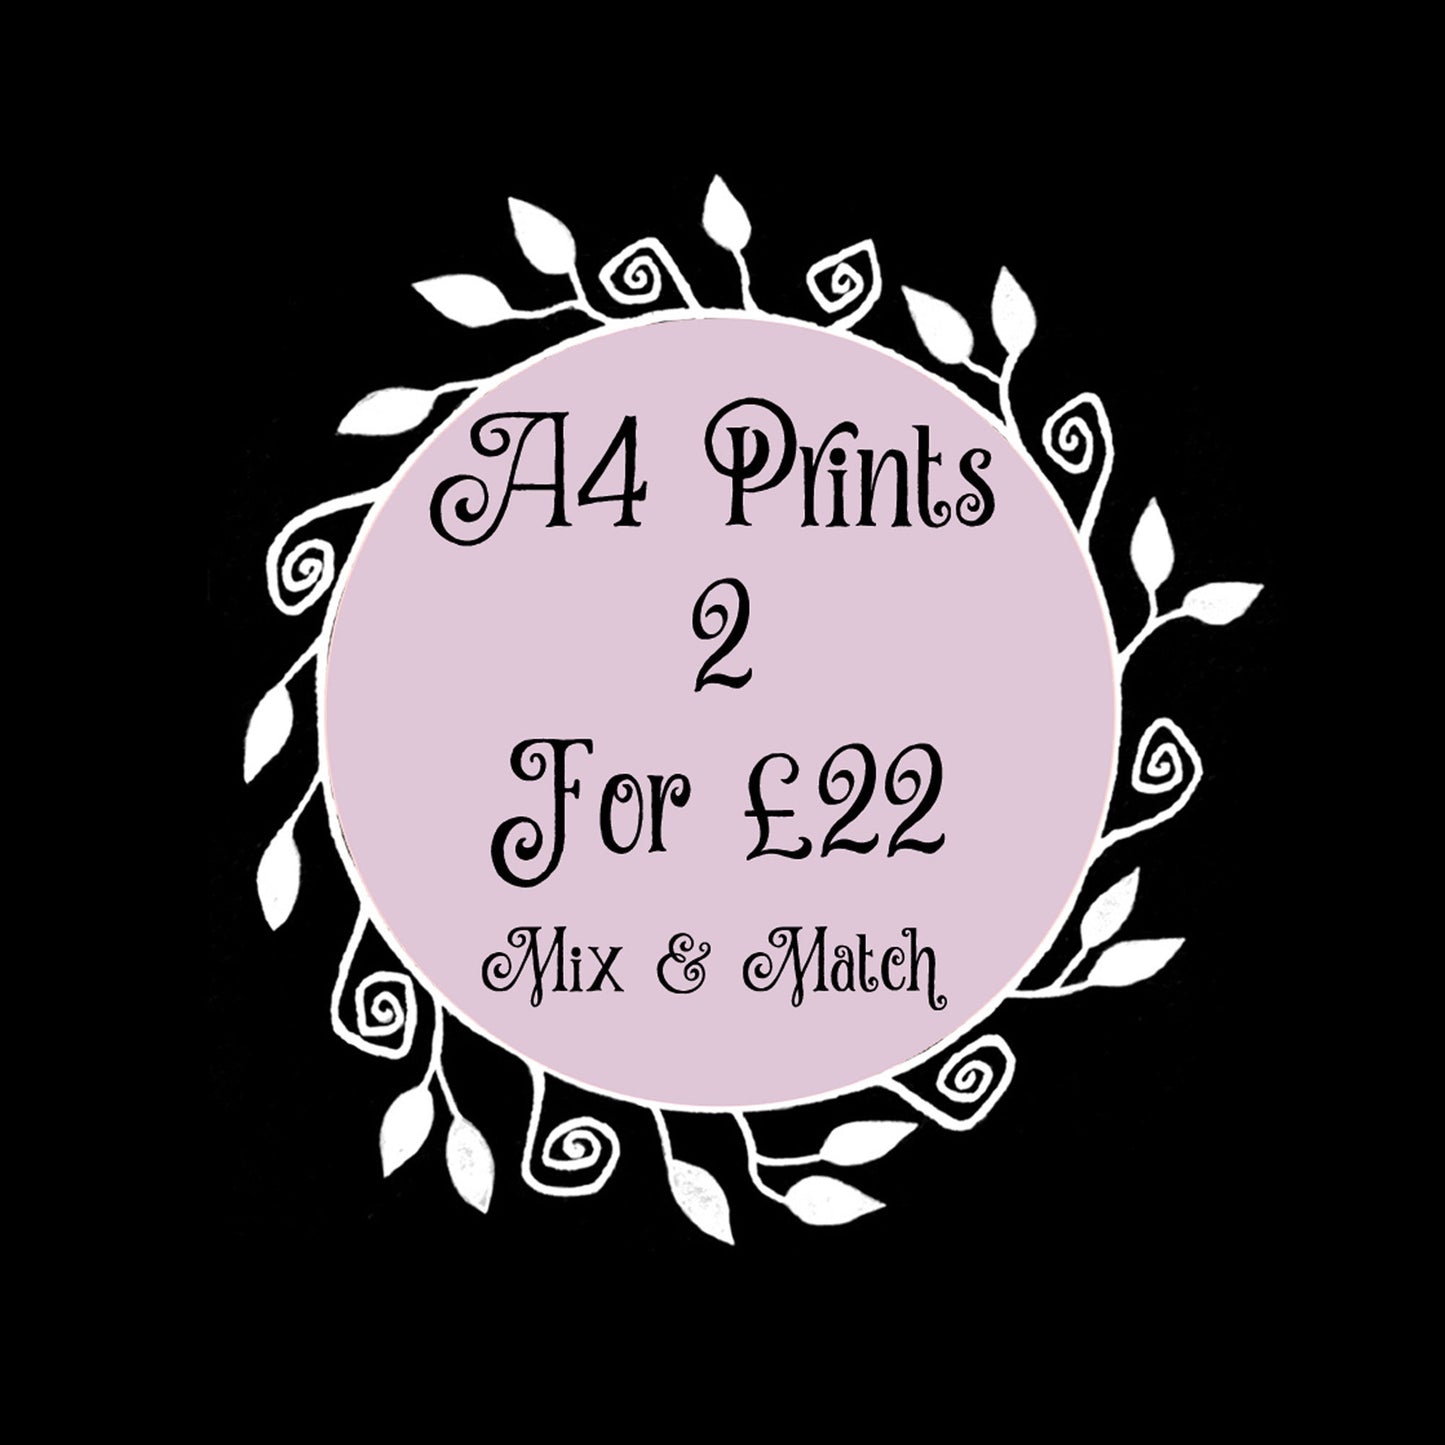 A4 Print Offer - Any 2 A4 Size Illustration Prints For 22 Pounds - Mix And Match Any Design